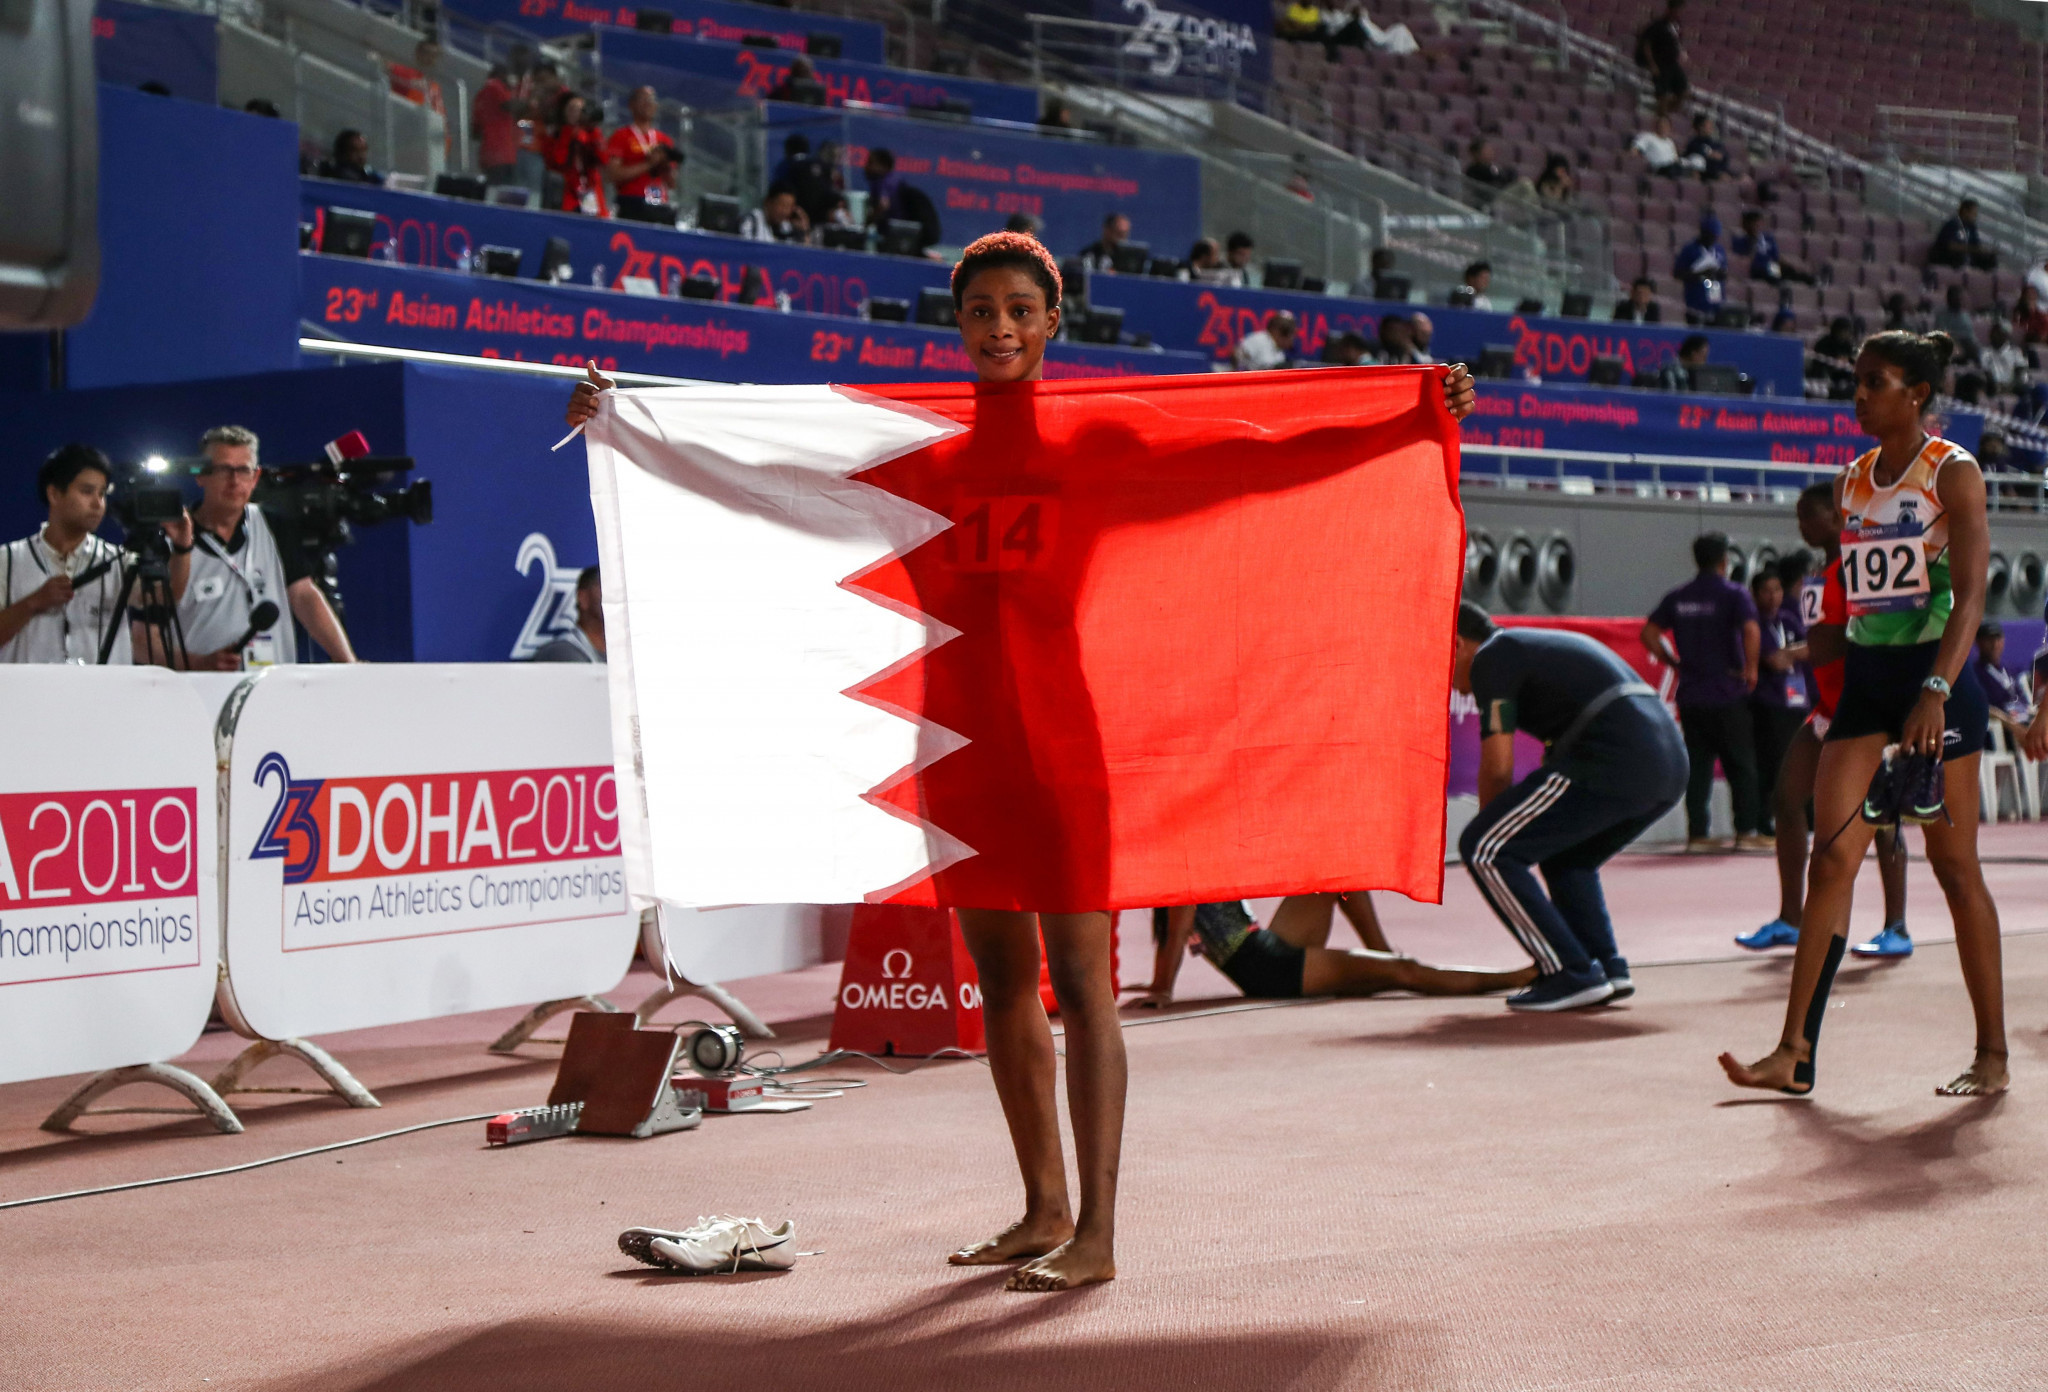 Bahrain’s Naser takes title number four on final day of Asian Athletics Championships in Doha